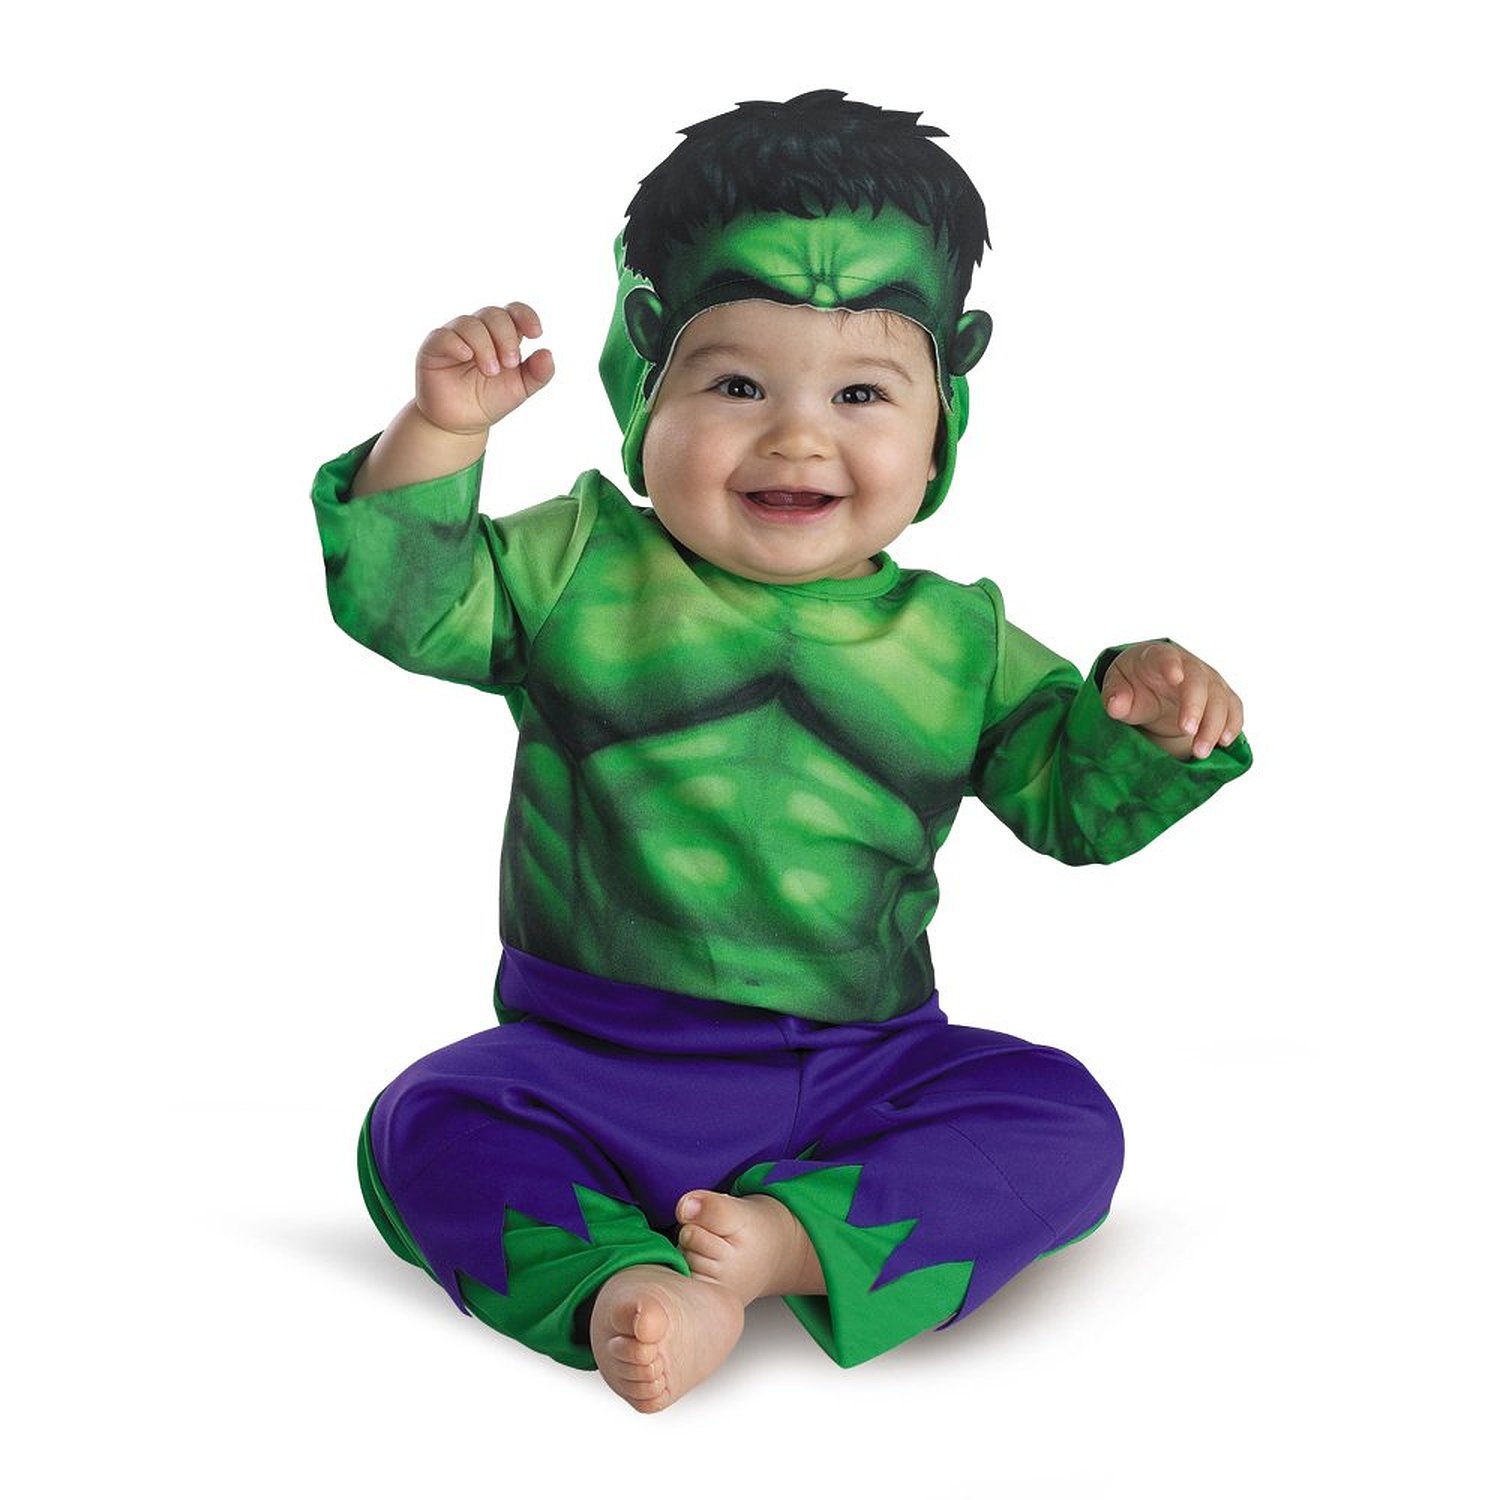 The Hulk Costumes for Adults and Kids